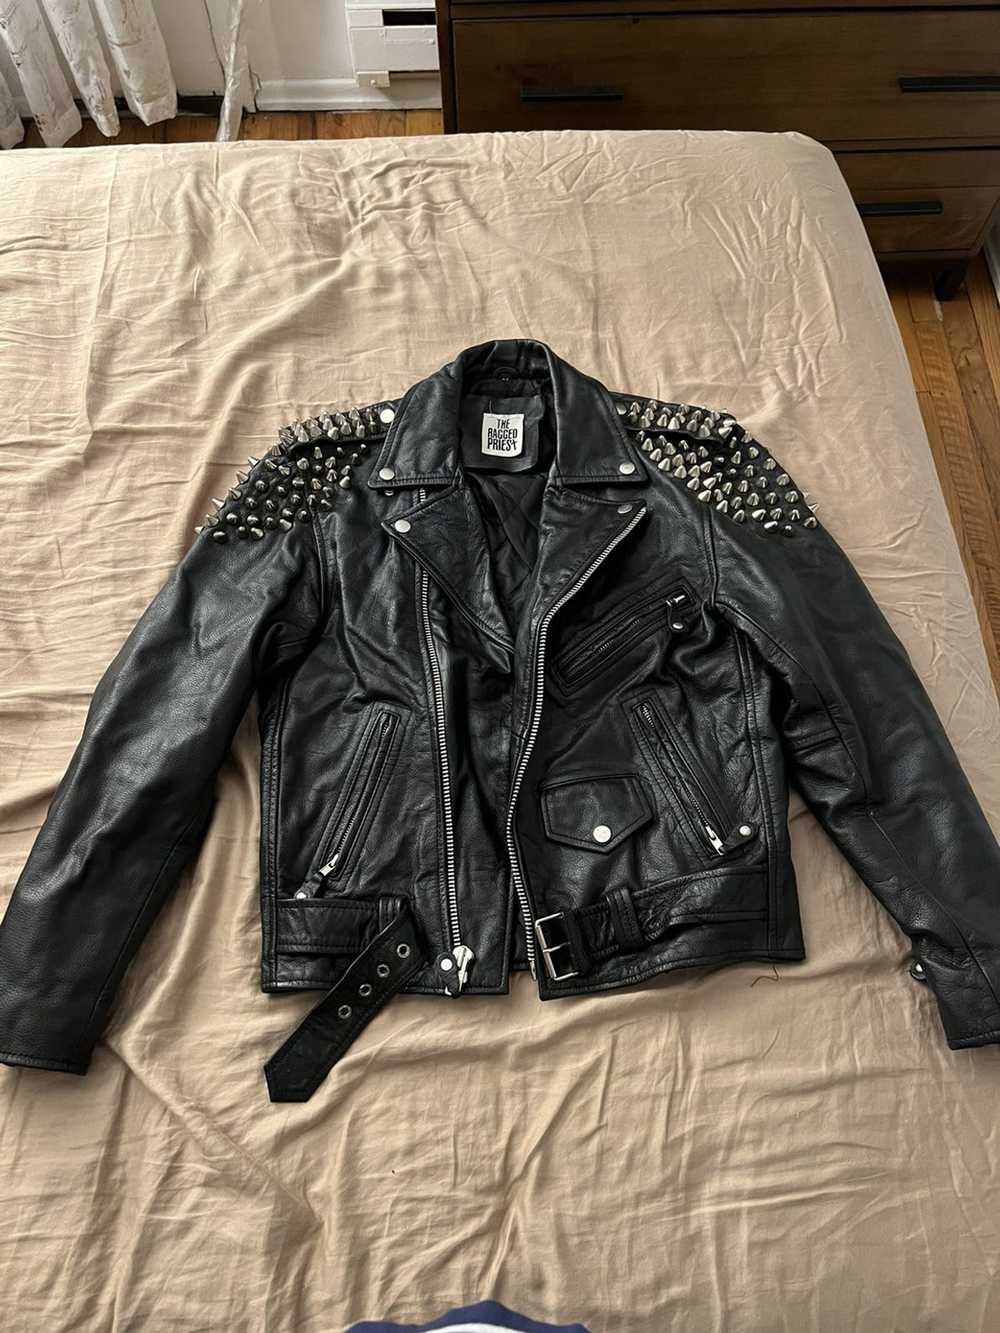 Designer Ragged Priest Leather Jacket with spikes - image 1